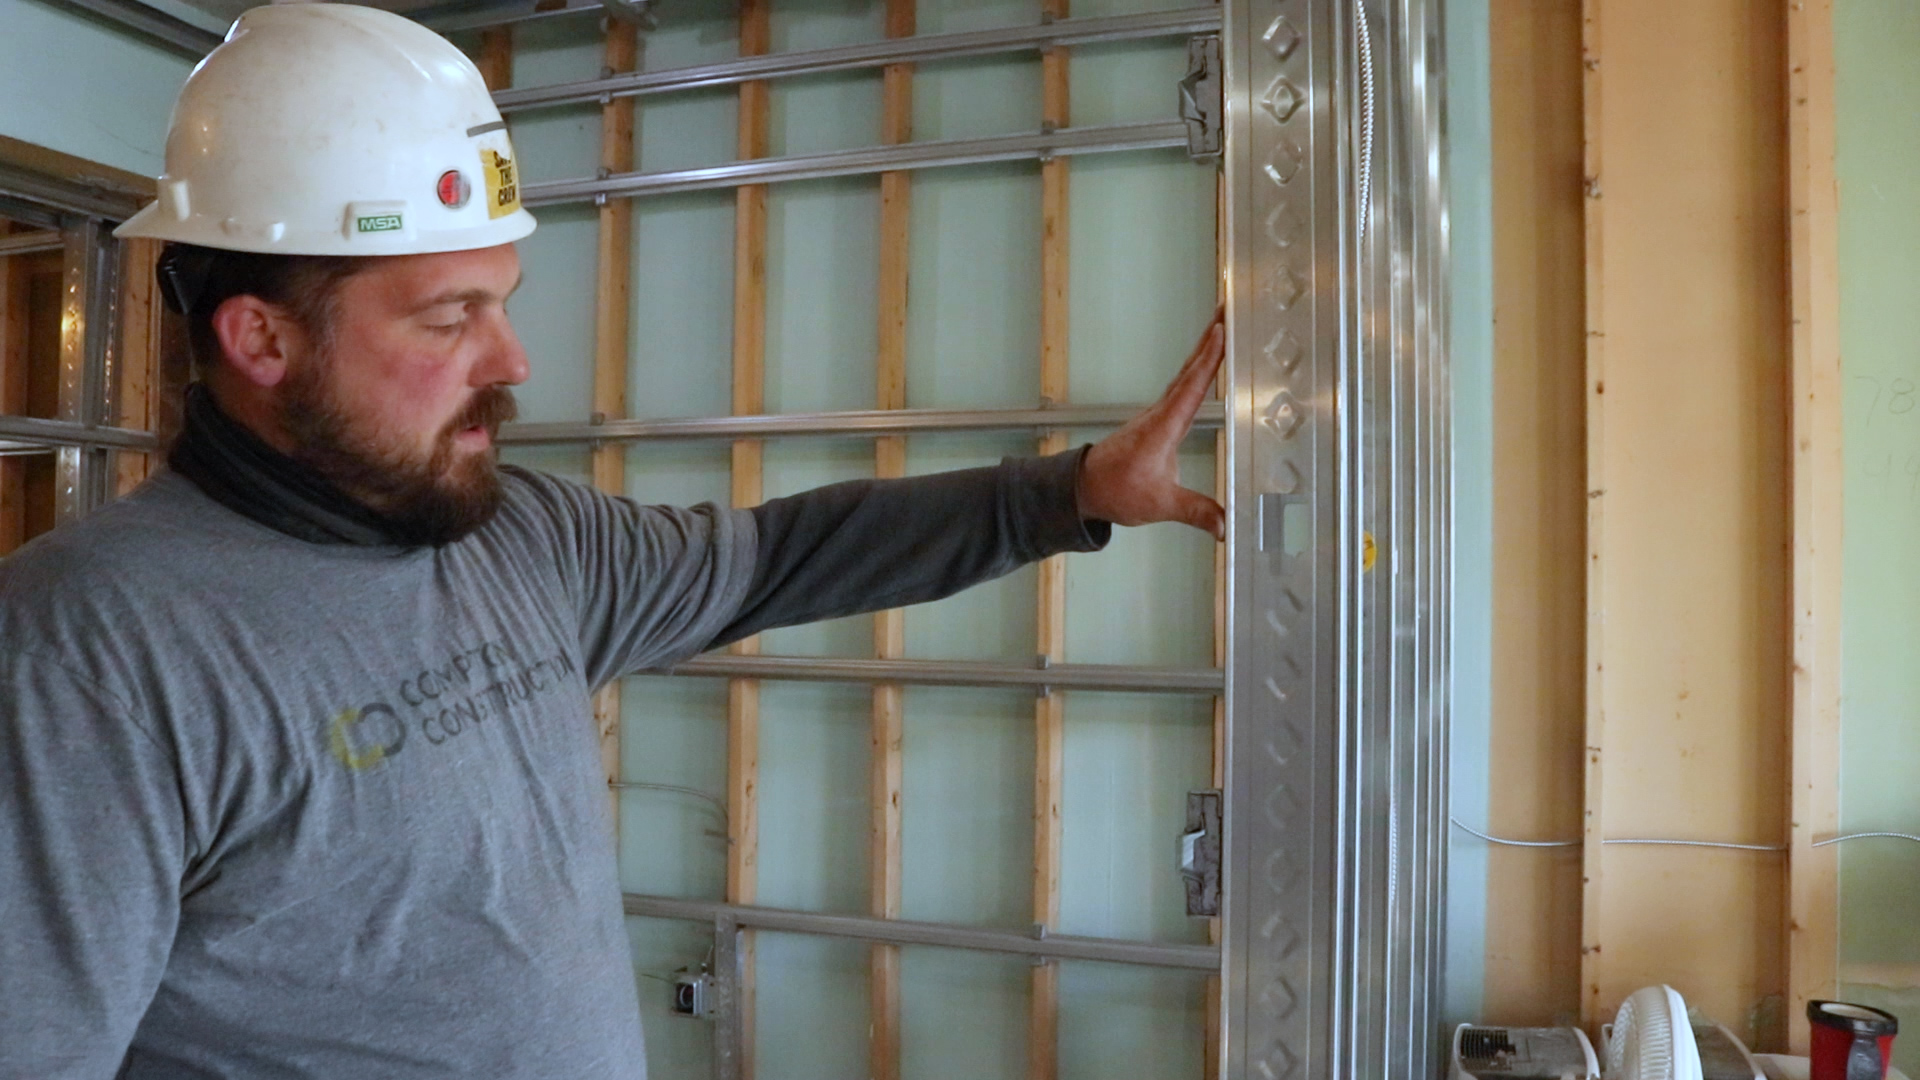 Don demonstrates the floating wall attachments that facilitate soundproofing